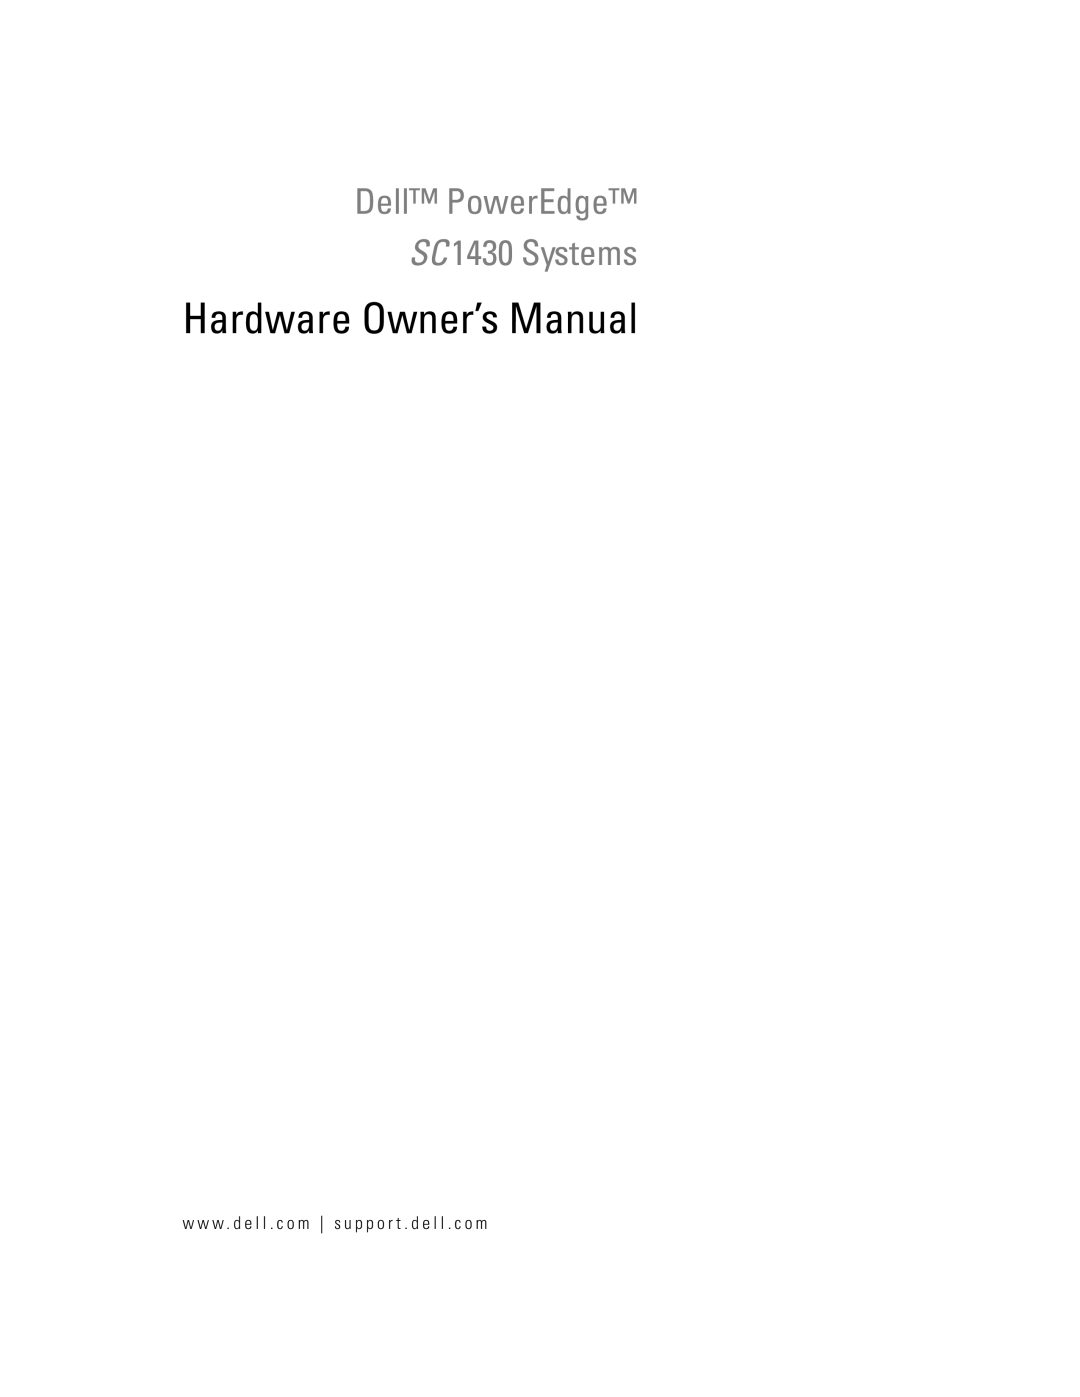 Dell owner manual Dell PowerEdge SC1430 Systems, W . d e l l . c o m s u p p o r t . d e l l . c o m 